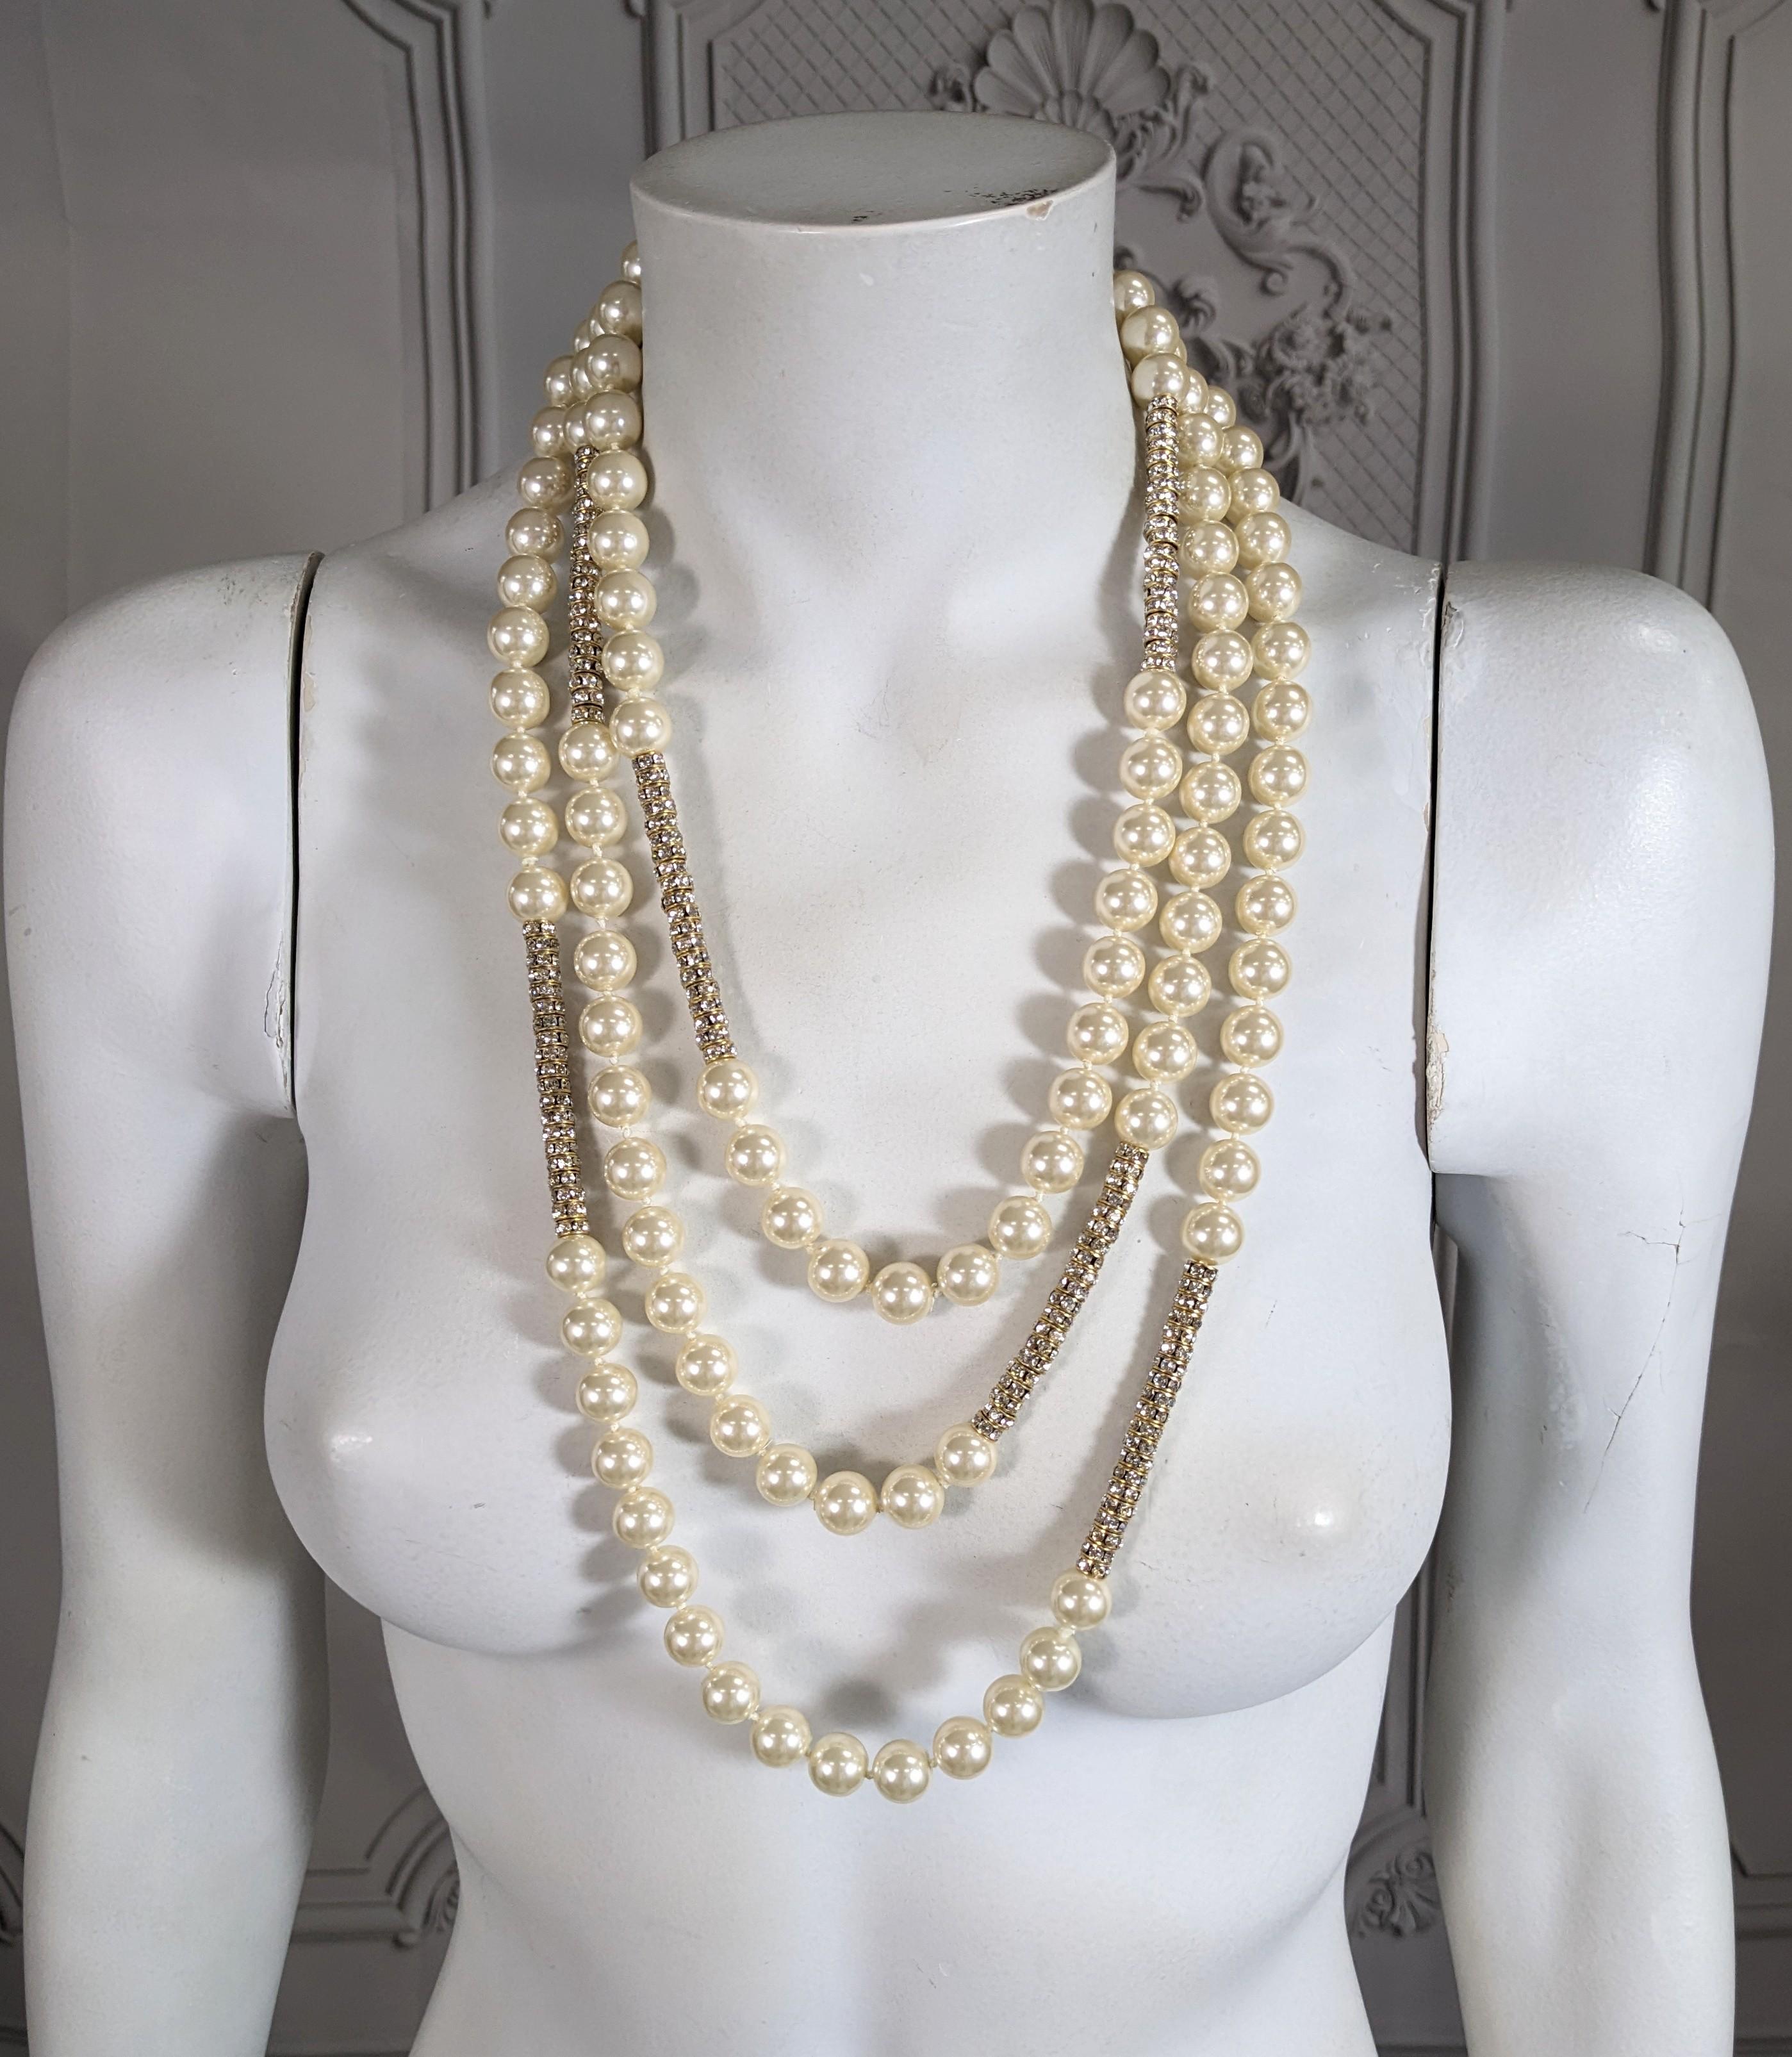 Rare Chanel Endless Pearl and Crystal Rondel Necklace For Sale 1